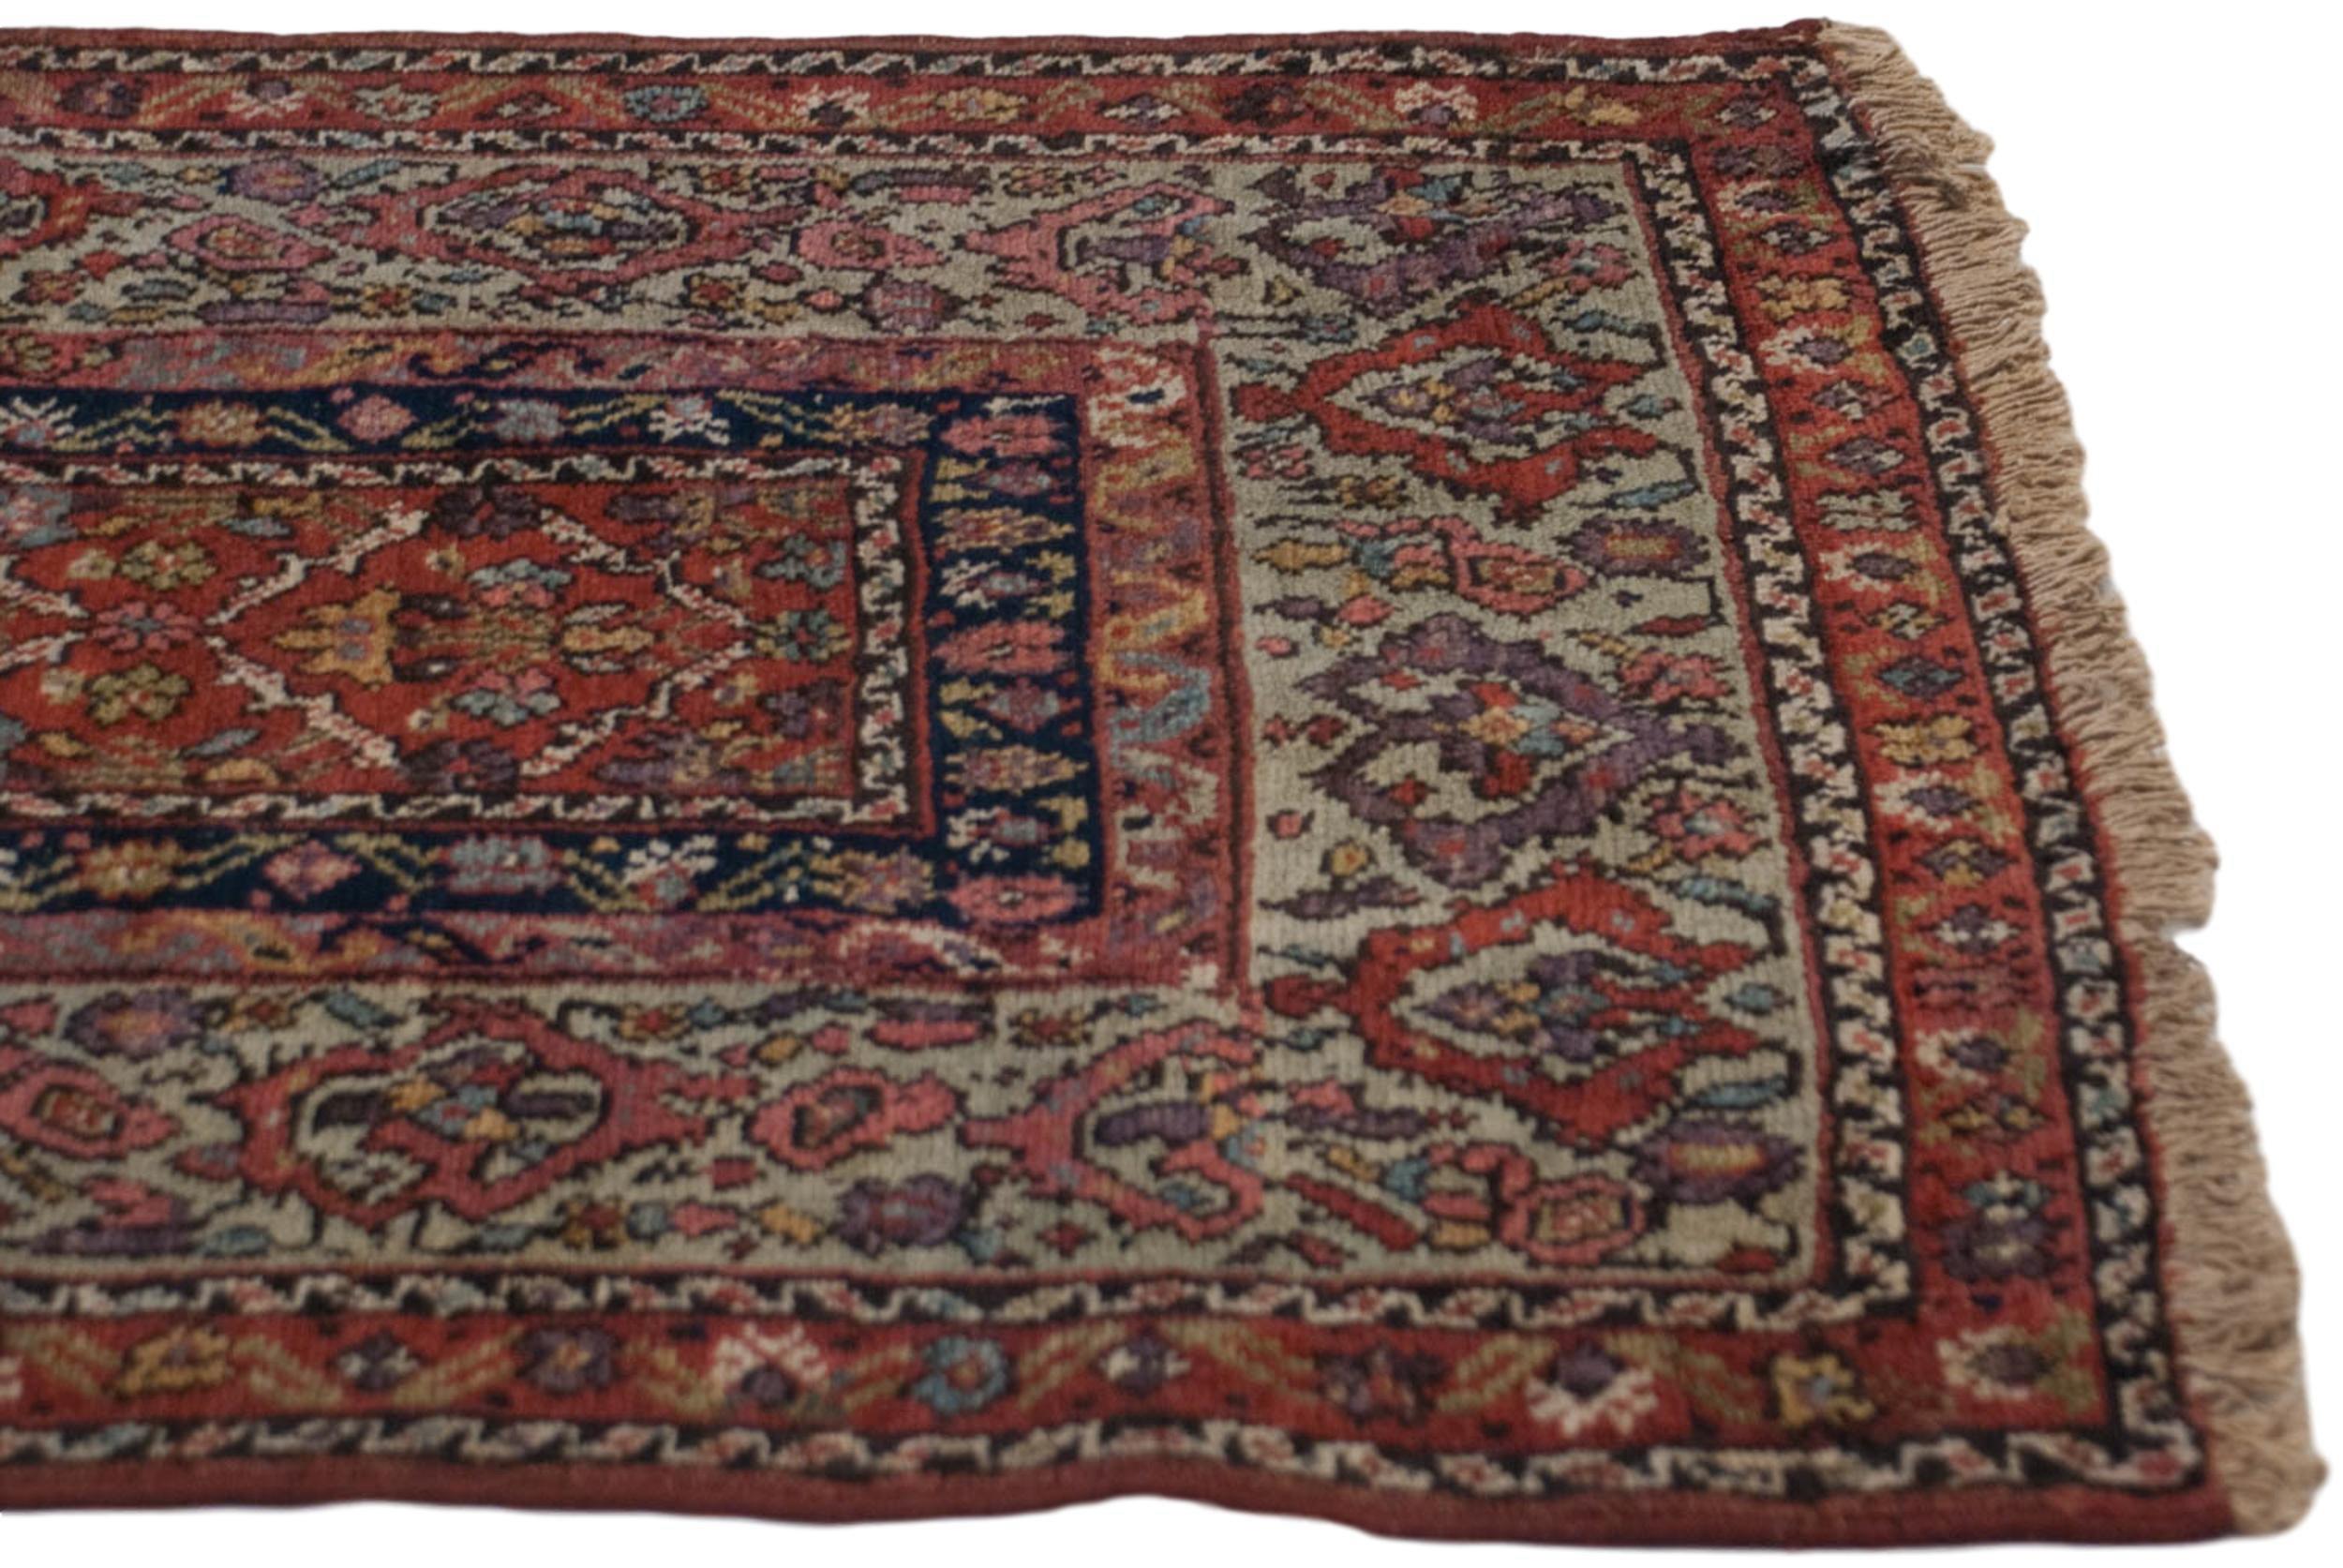 :: Highly unusual and early example of a Fereghan carpet, in unreduced original proportions with narrow framed main field in lattice paneled diamond shaped outline with each interior fill of tree of life motif, and wide banded main border with